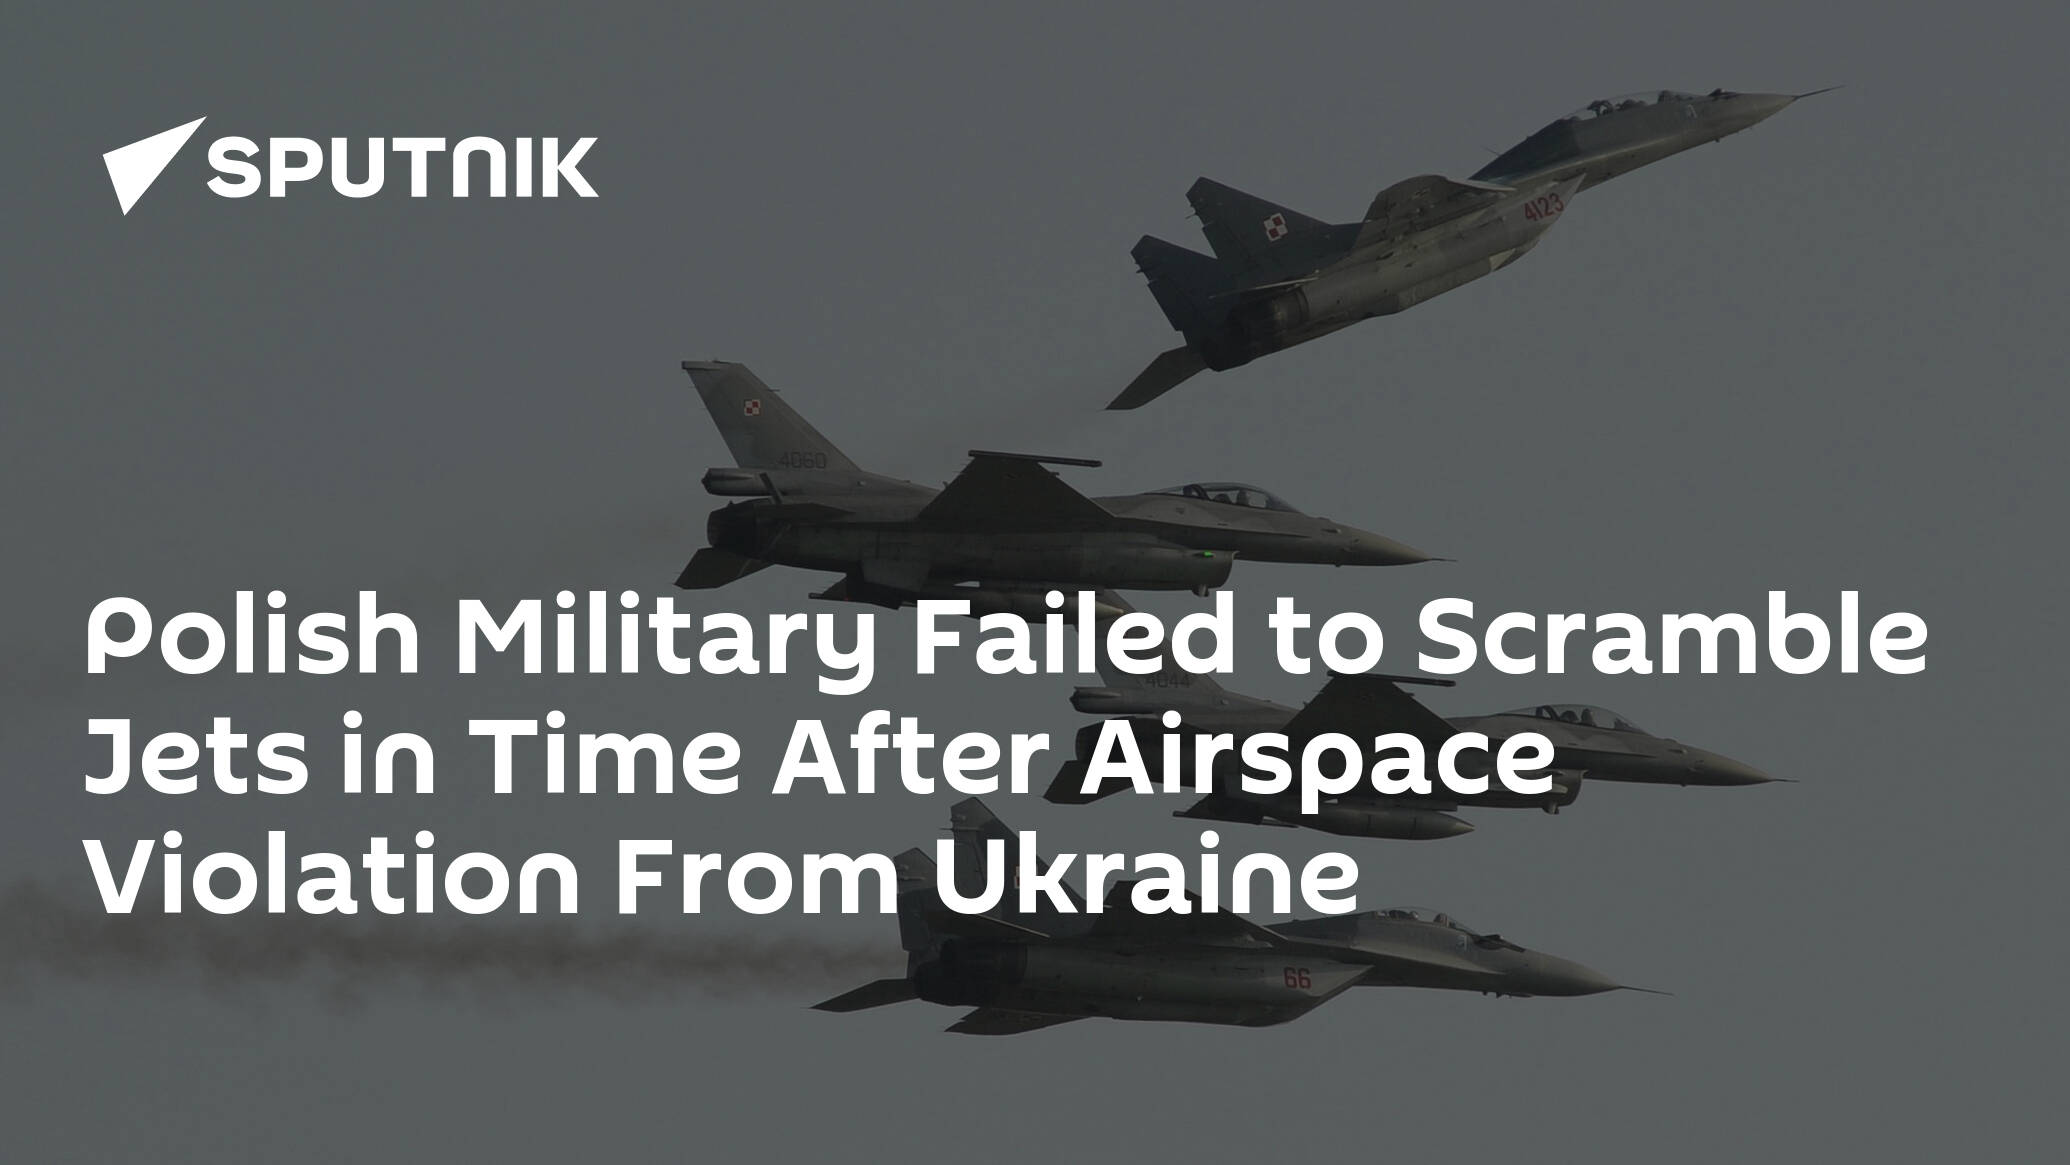 Polish Military Failed to Scramble Jets in Time After Airspace Violation From Ukraine